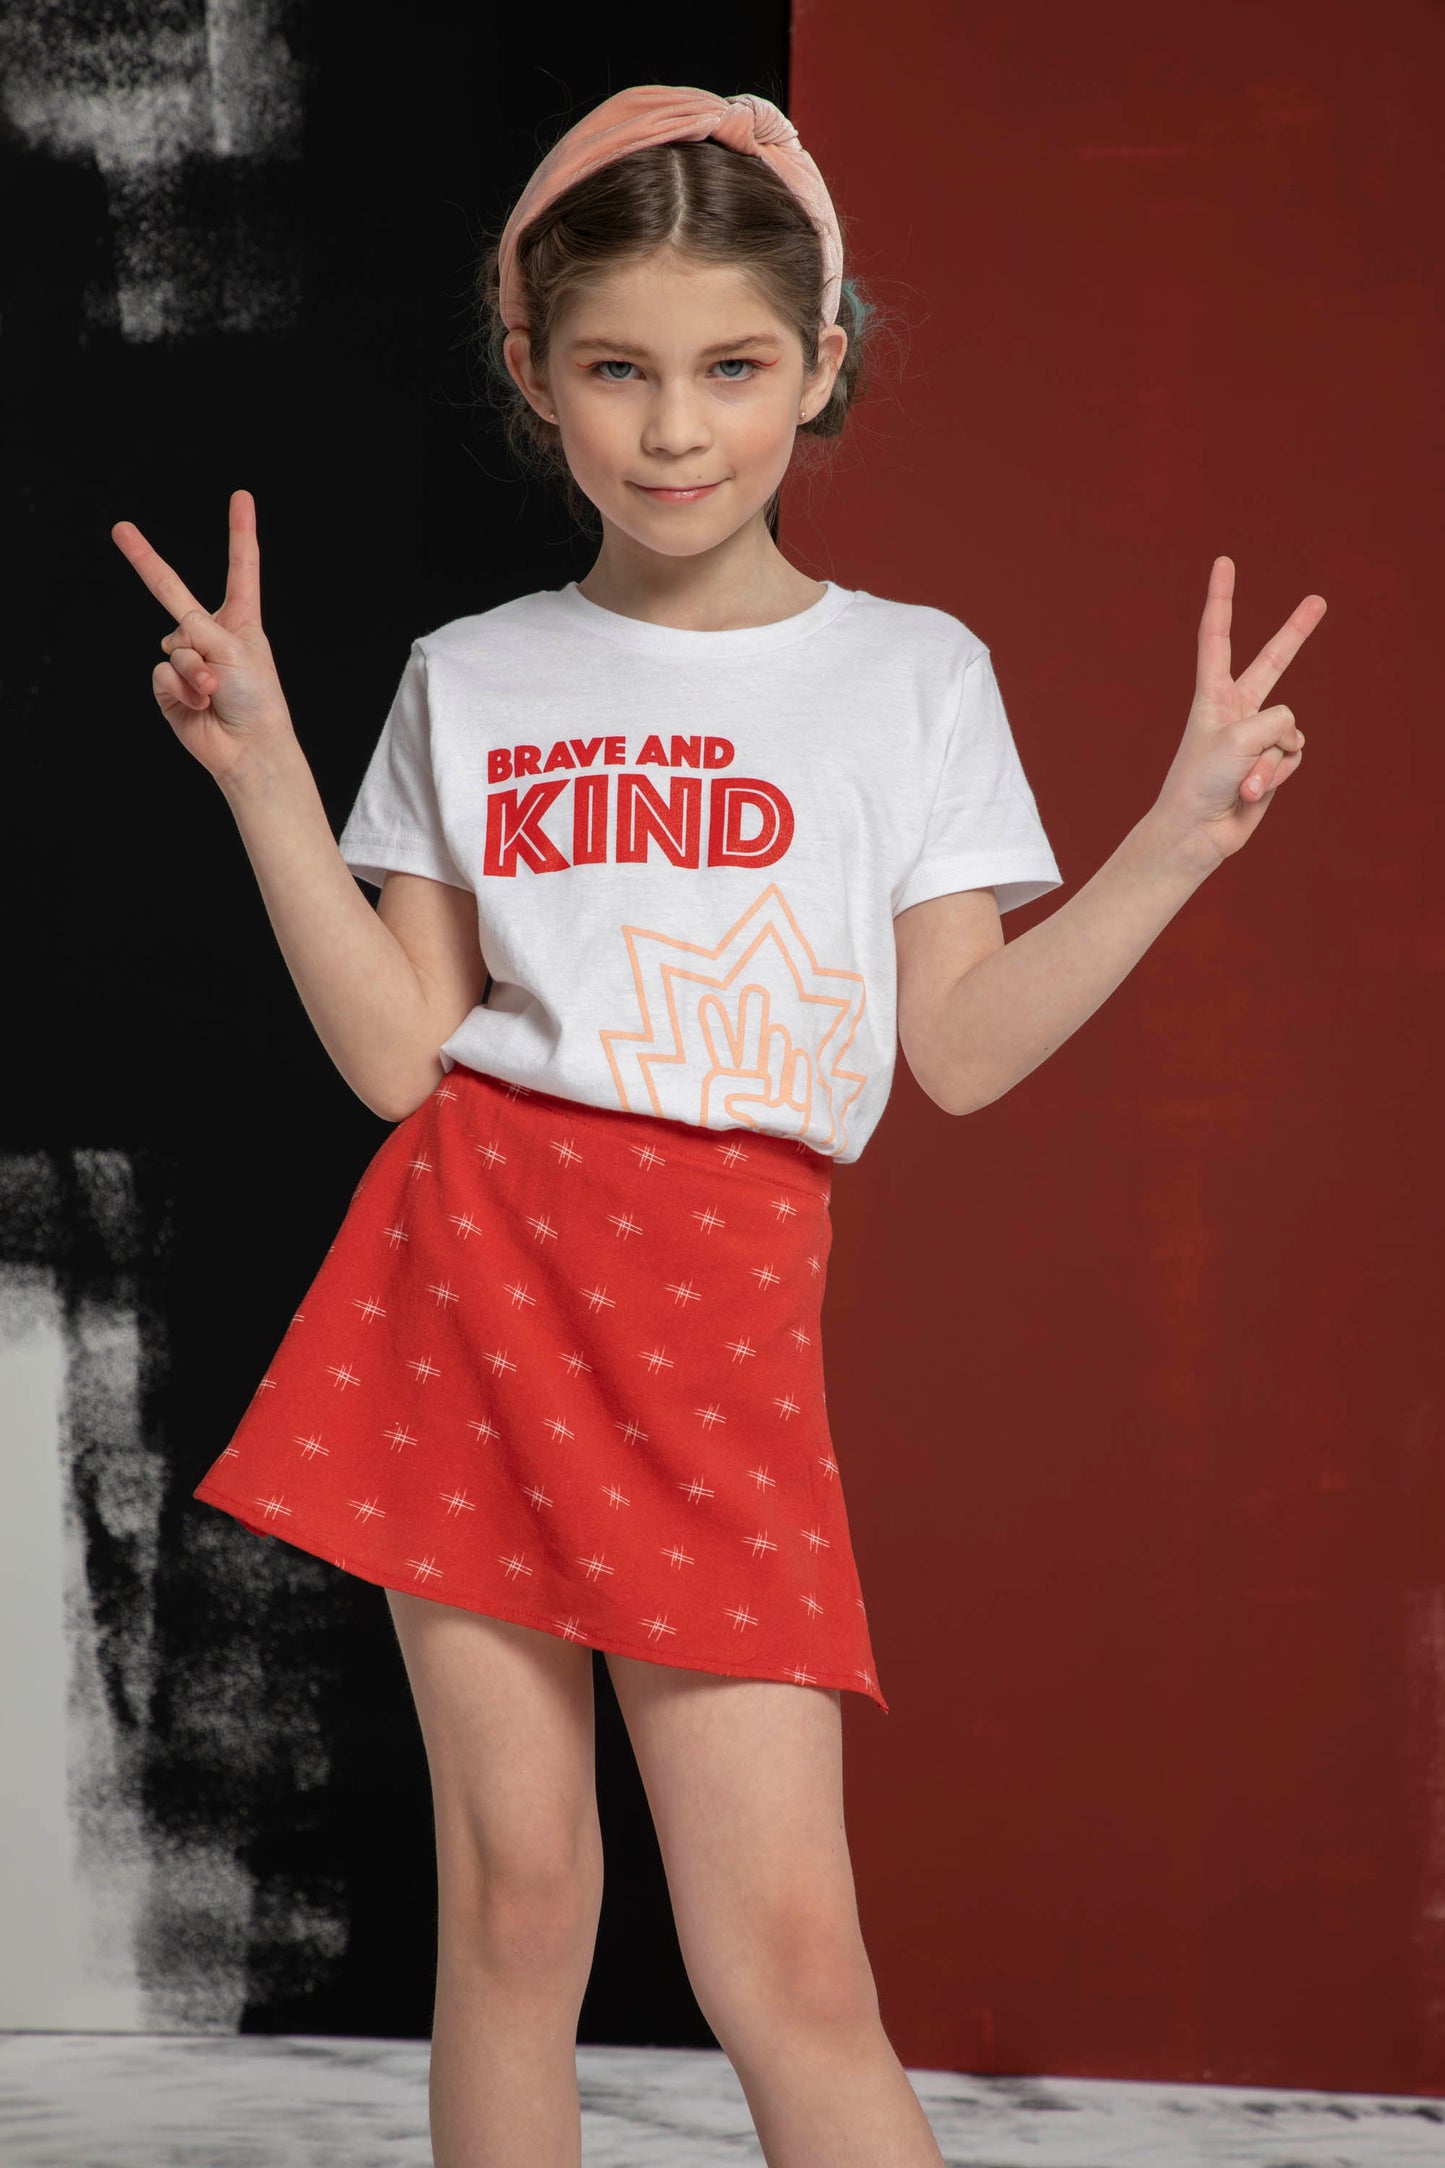 Leaning to the side and smile on the camera a girl poses with double peace signs in her shirt